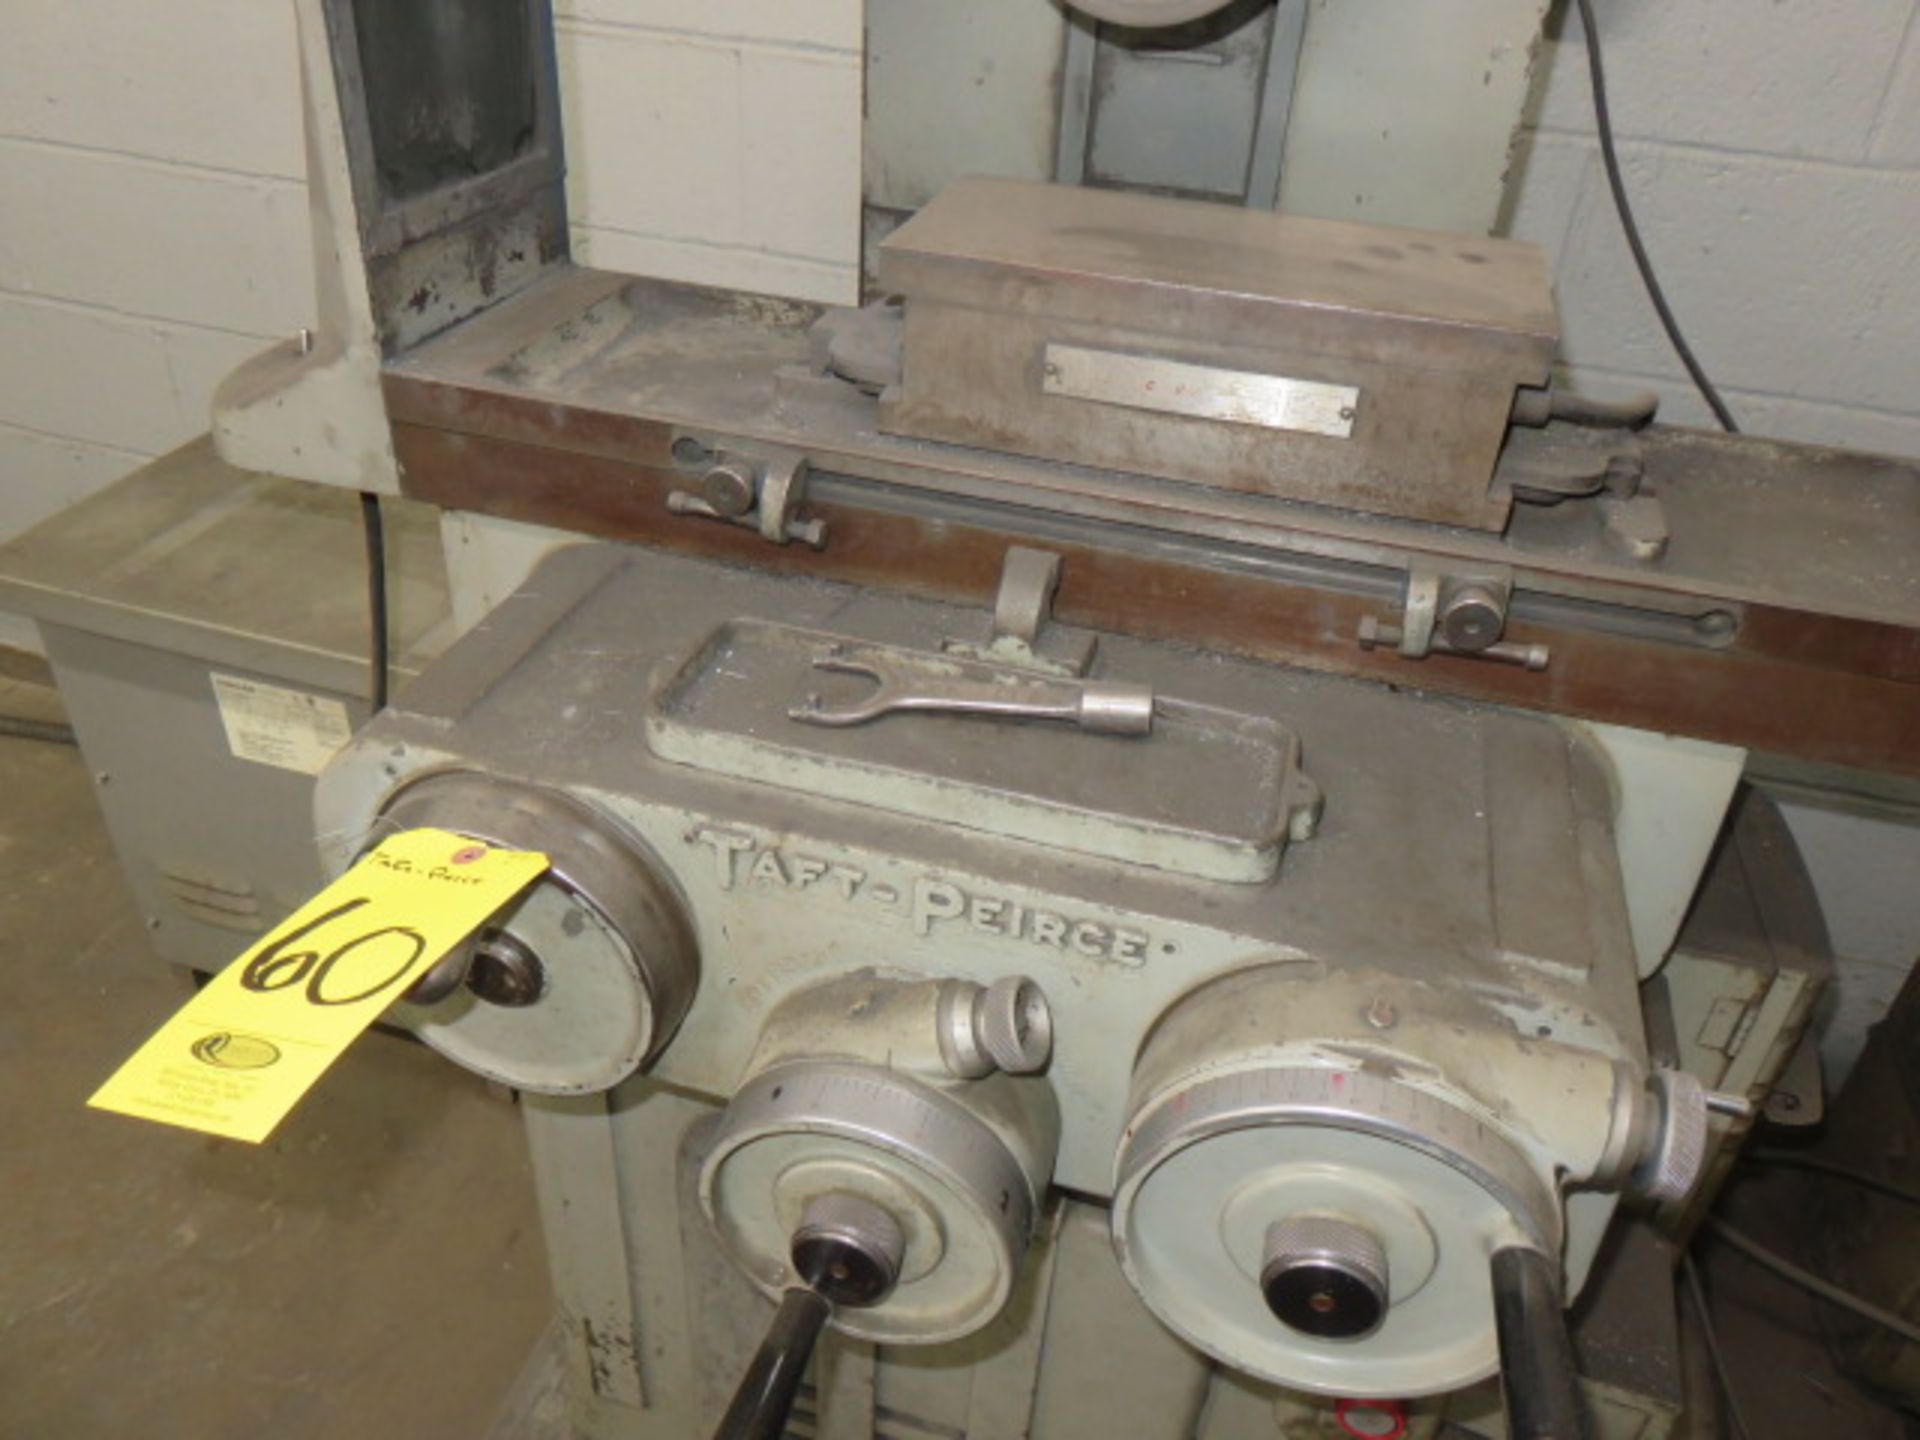 TAFT-PIERCE SURFACE GRINDER, 6 IN X 12 IN ELECTRO-MAGNETIC CHUCK, VARIABLE SPEED DC DRIVE - Image 2 of 3